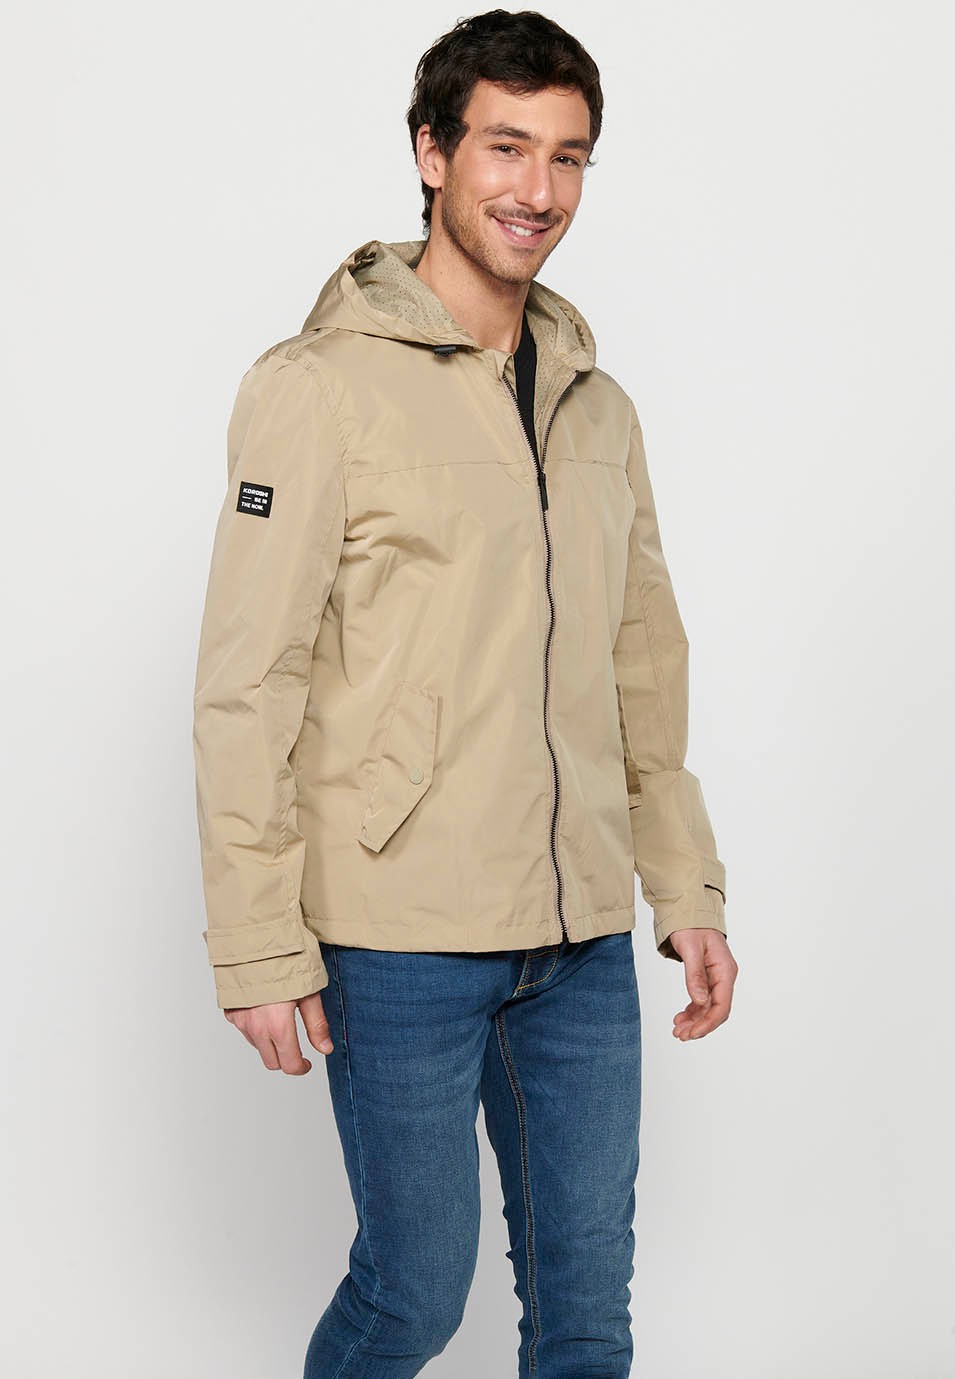 Water Repellent Jacket with Hooded Collar and Front Zipper Closure, Beige Pockets for Men